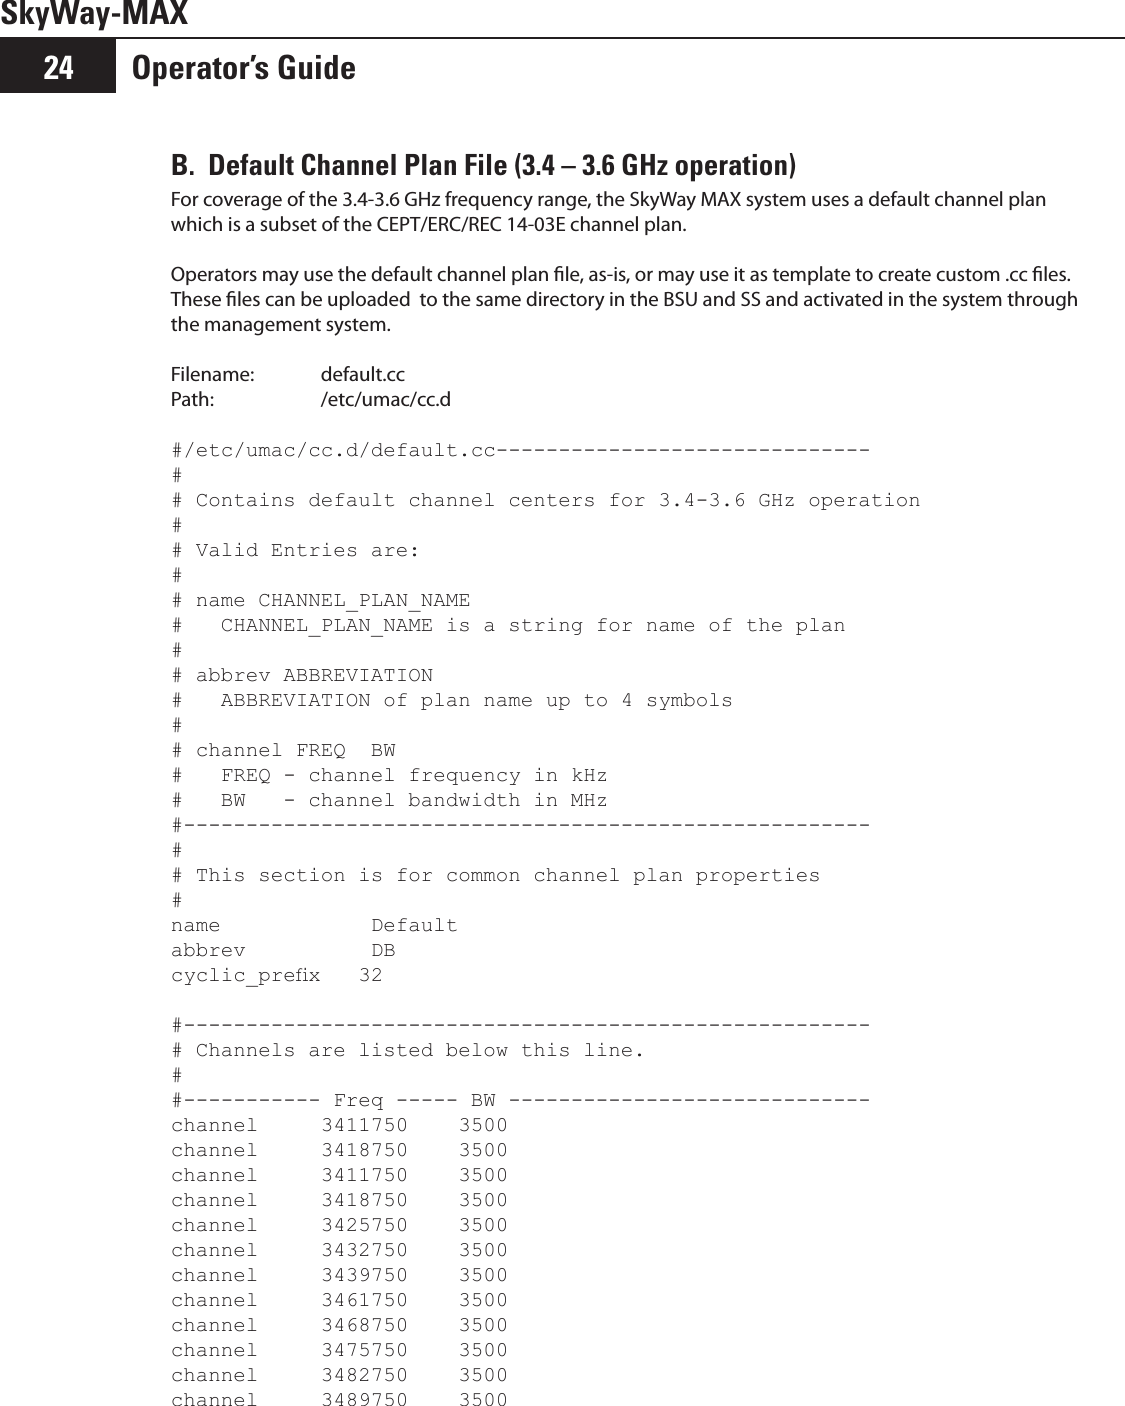 Operator’s Guide24SkyWay-MAXB.  Default Channel Plan File (3.4 – 3.6 GHz operation)For coverage of the 3.4-3.6 GHz frequency range, the SkyWay MAX system uses a default channel plan which is a subset of the CEPT/ERC/REC 14-03E channel plan.   Operators may use the default channel plan le, as-is, or may use it as template to create custom .cc les.  These les can be uploaded  to the same directory in the BSU and SS and activated in the system through the management system.  Filename:  default.ccPath:    /etc/umac/cc.d#/etc/umac/cc.d/default.cc------------------------------## Contains default channel centers for 3.4-3.6 GHz operation## Valid Entries are:## name CHANNEL_PLAN_NAME#   CHANNEL_PLAN_NAME is a string for name of the plan## abbrev ABBREVIATION#   ABBREVIATION of plan name up to 4 symbols## channel FREQ  BW#   FREQ - channel frequency in kHz#   BW   - channel bandwidth in MHz#-------------------------------------------------------## This section is for common channel plan properties#name            Defaultabbrev          DBcyclic_prex   32#-------------------------------------------------------# Channels are listed below this line. ##----------- Freq ----- BW -----------------------------channel     3411750    3500channel     3418750    3500channel     3411750    3500channel     3418750    3500channel     3425750    3500channel     3432750    3500channel     3439750    3500channel     3461750    3500channel     3468750    3500channel     3475750    3500channel     3482750    3500channel     3489750    3500